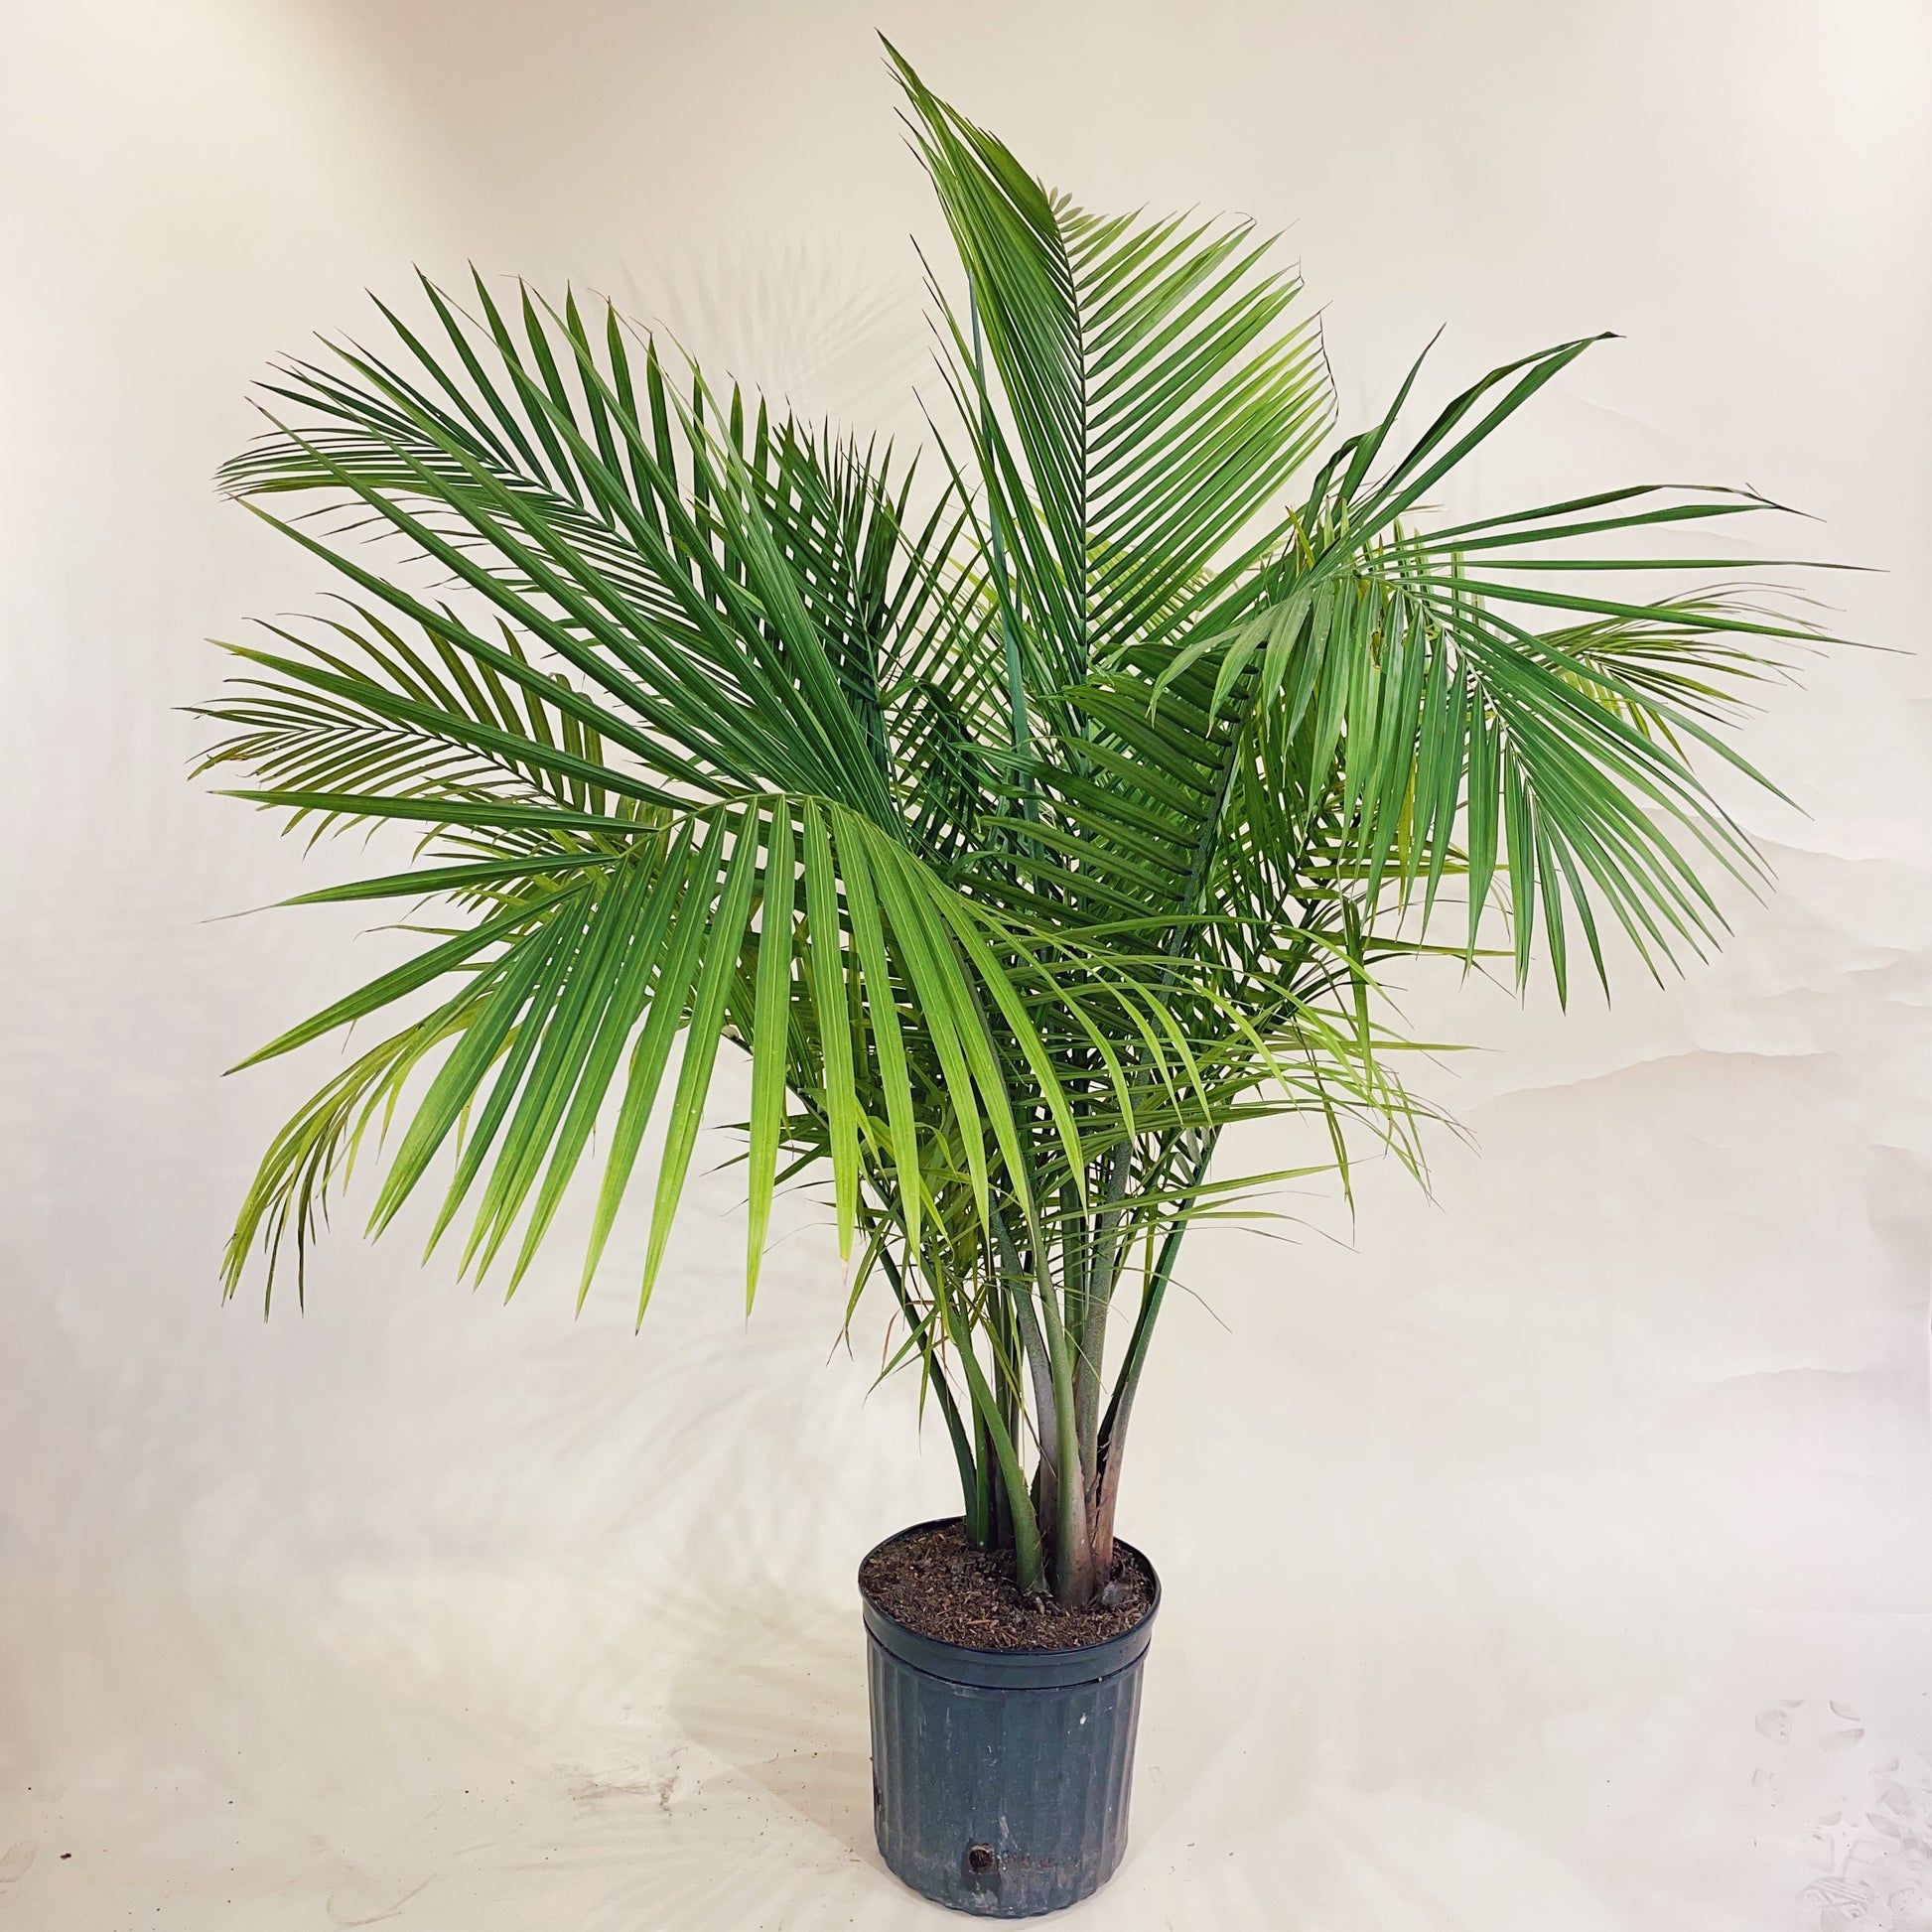 Majesty Palm, Majestic Palm (Ravenea rivularis) in a 12 inch pot. Indoor plant for sale by Promise Supply for delivery and pickup in Toronto